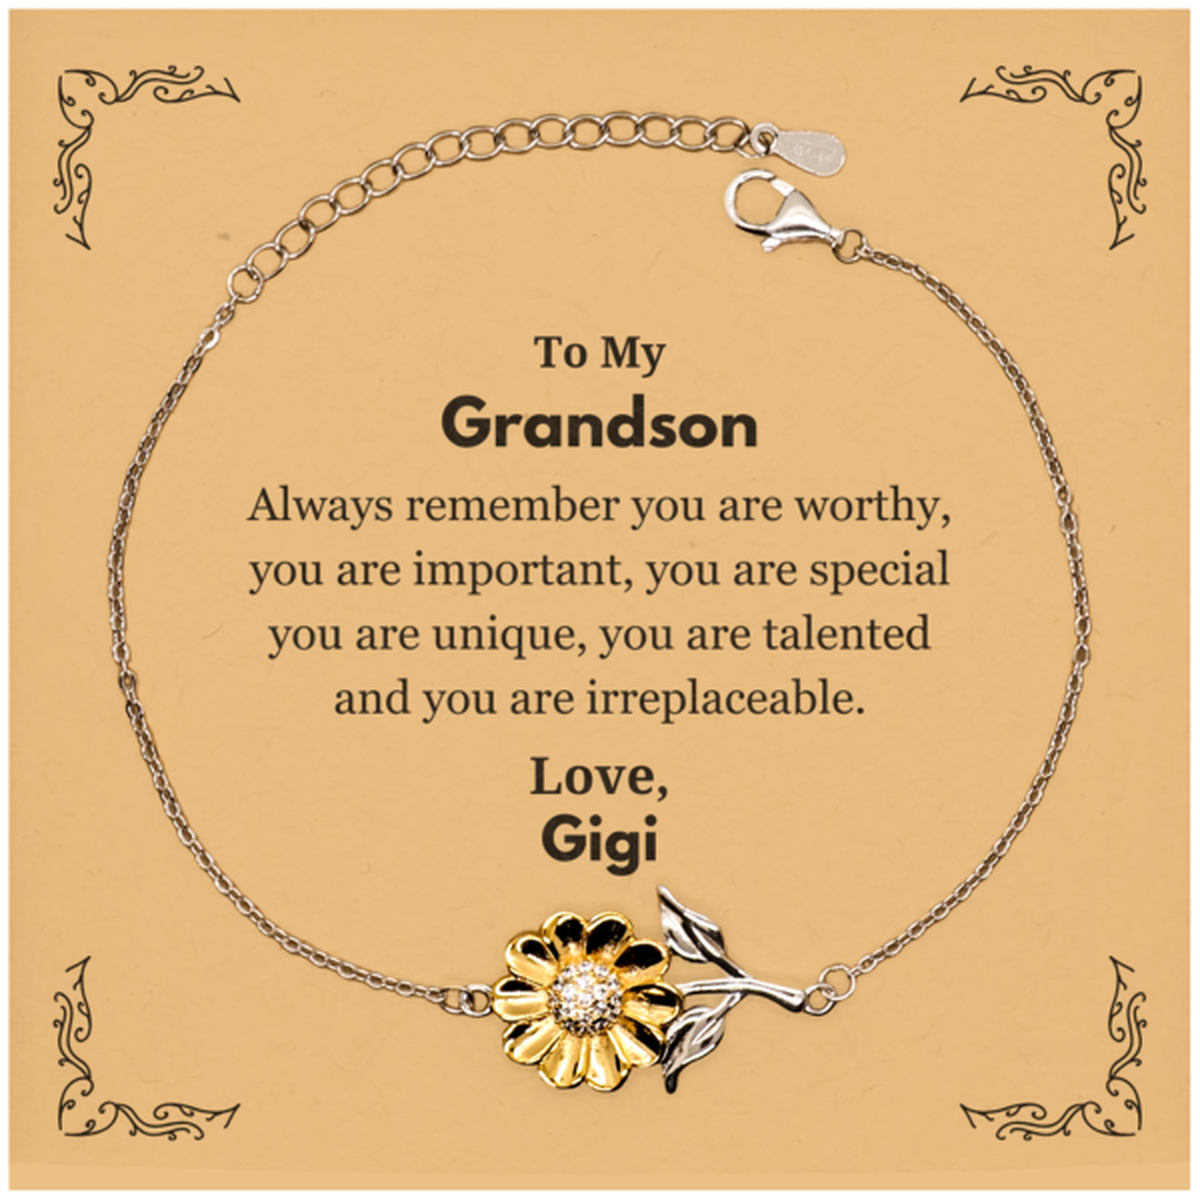 Grandson Birthday Gifts from Gigi, Inspirational Sunflower Bracelet for Grandson Christmas Graduation Gifts for Grandson Always remember you are worthy, you are important. Love, Gigi